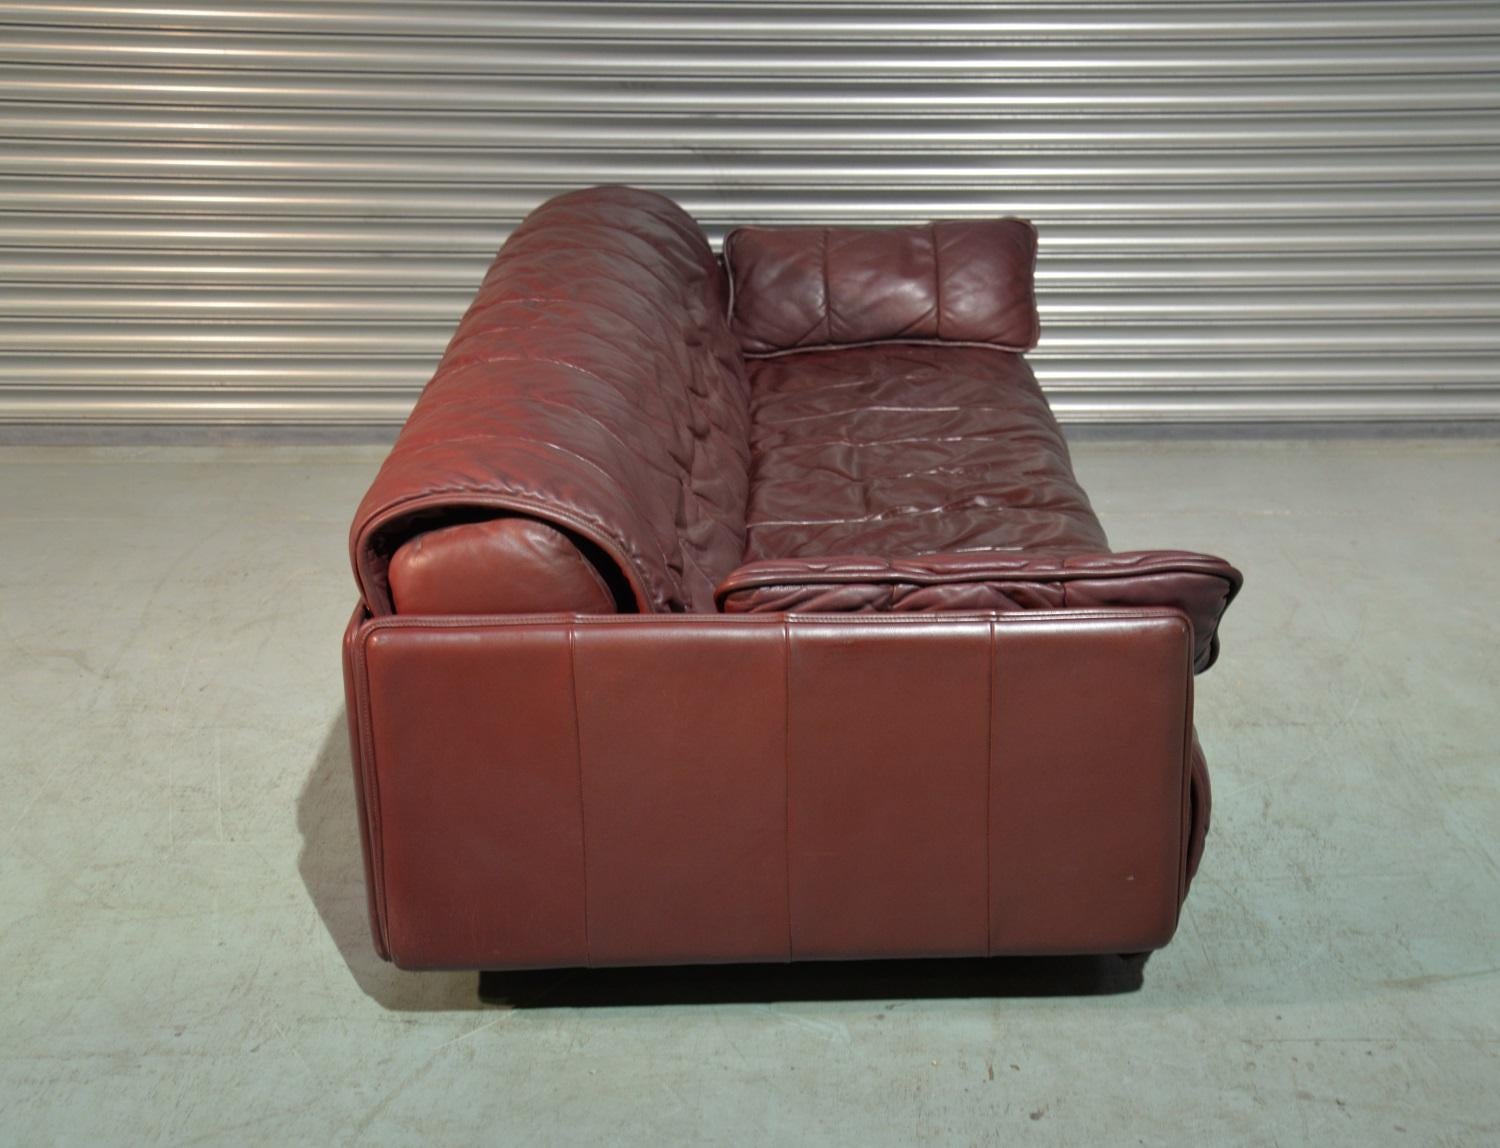 Swiss Vintage De Sede Patchwork Leather Sofa or Daybed, Switzerland, 1970s For Sale